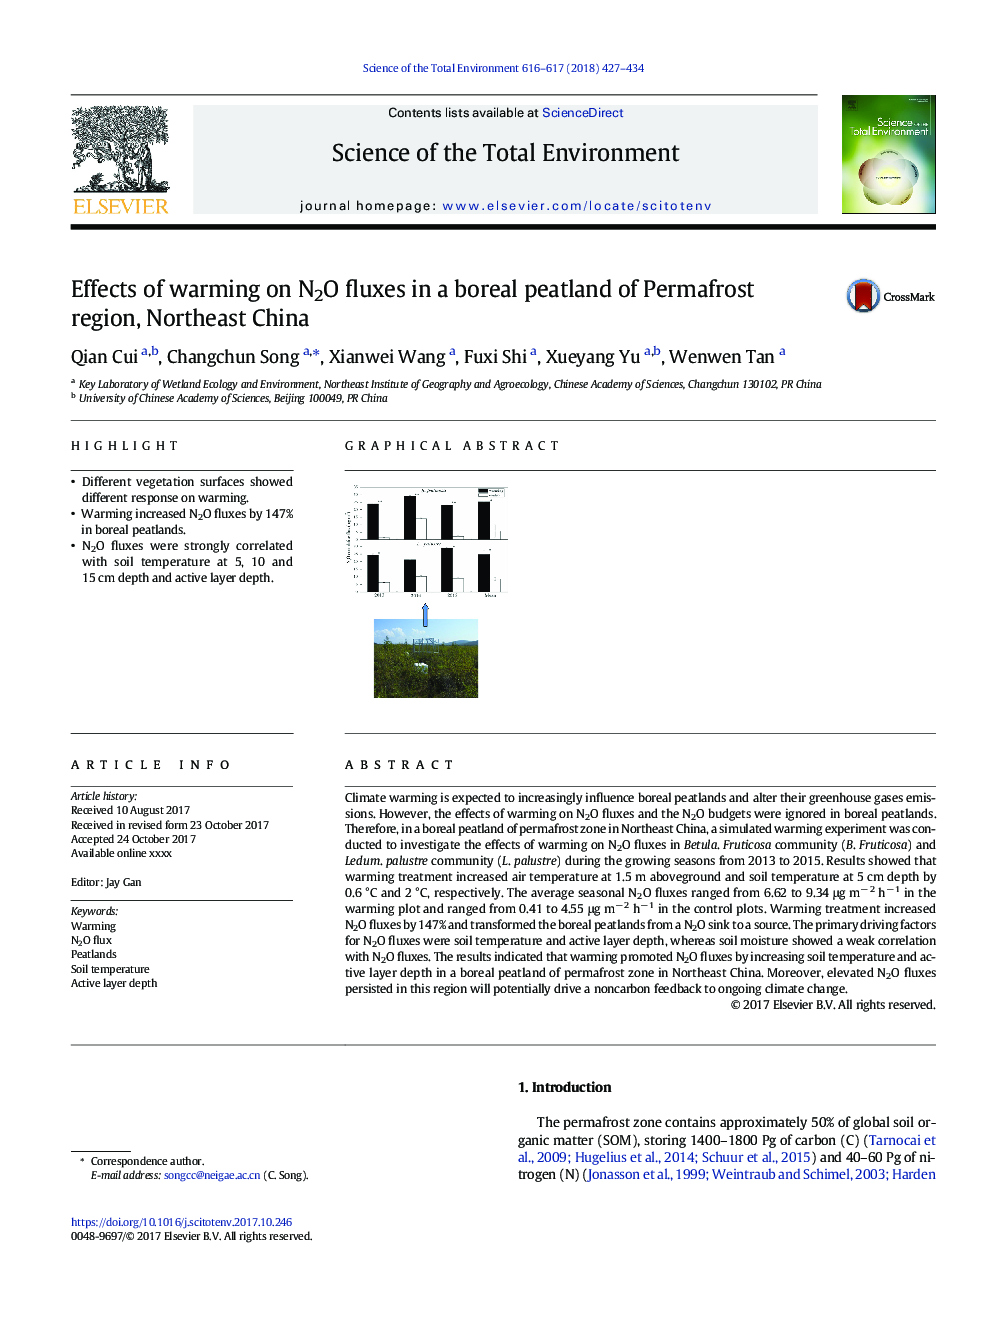 Effects of warming on N2O fluxes in a boreal peatland of Permafrost region, Northeast China